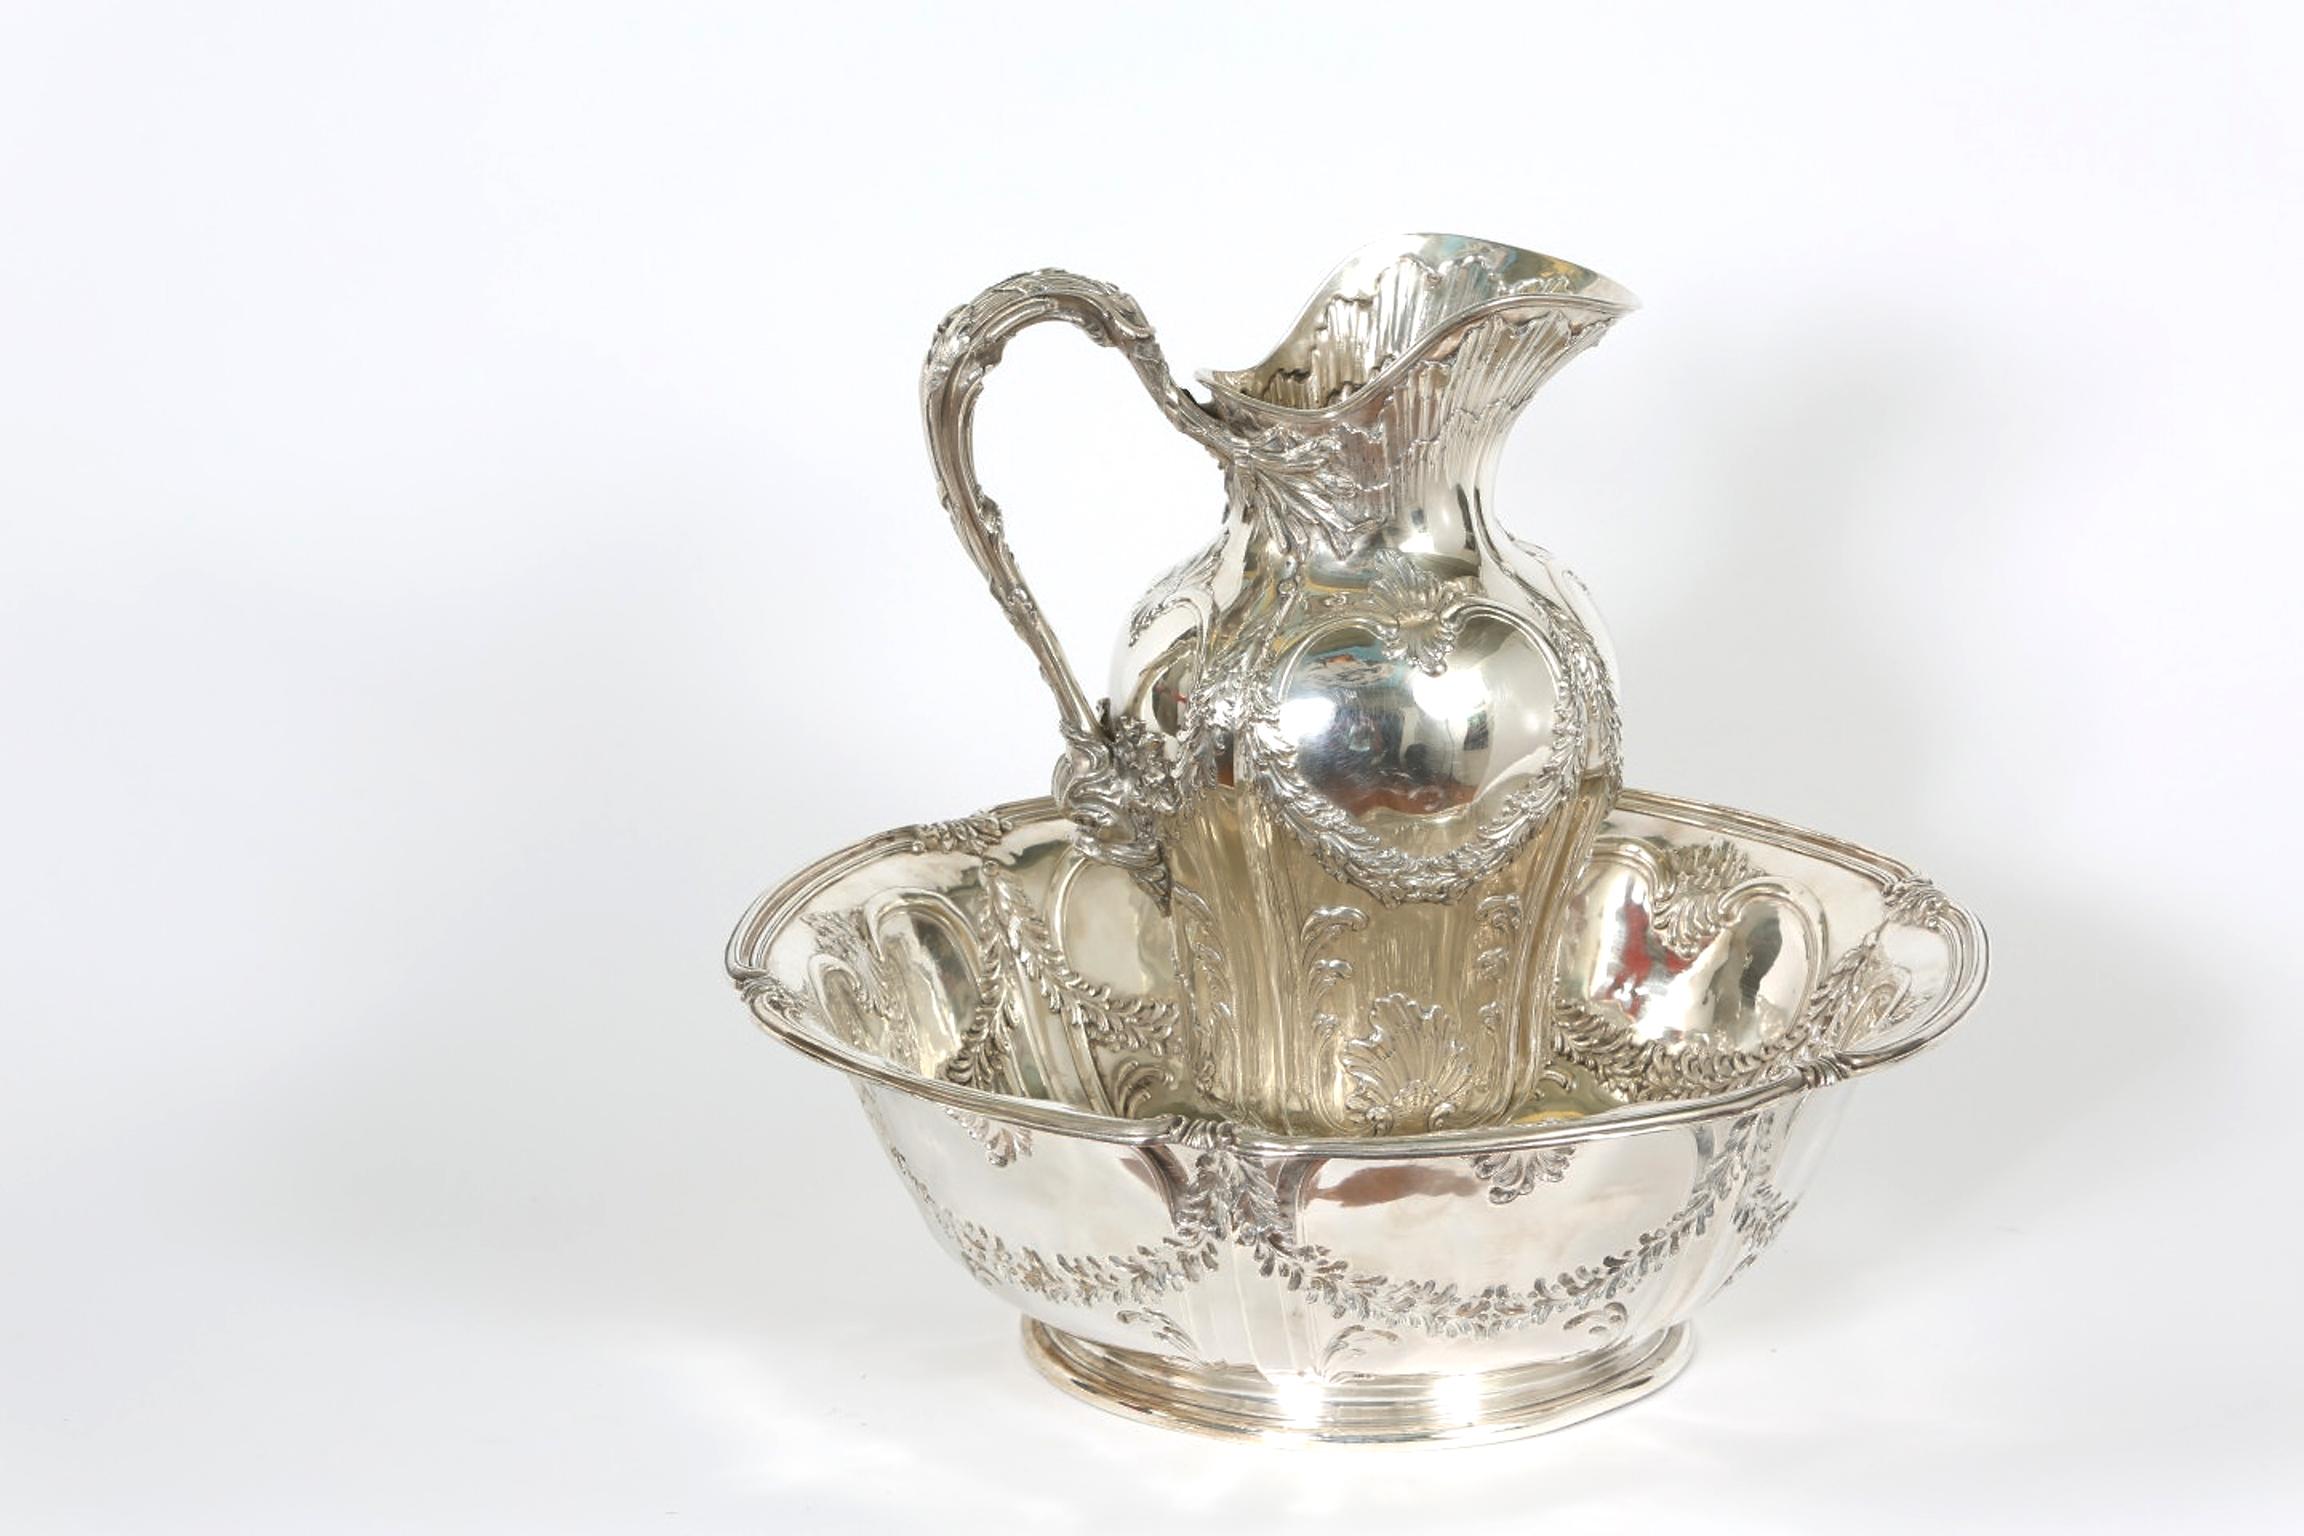 Early 20th century Art Nouveau French tetard sterling wash basin and jug . The silver pedestal jug is decorated with exterior foliate swags and scrolls design details with multi tiered ruffed edge decoration . The handle is also designed with